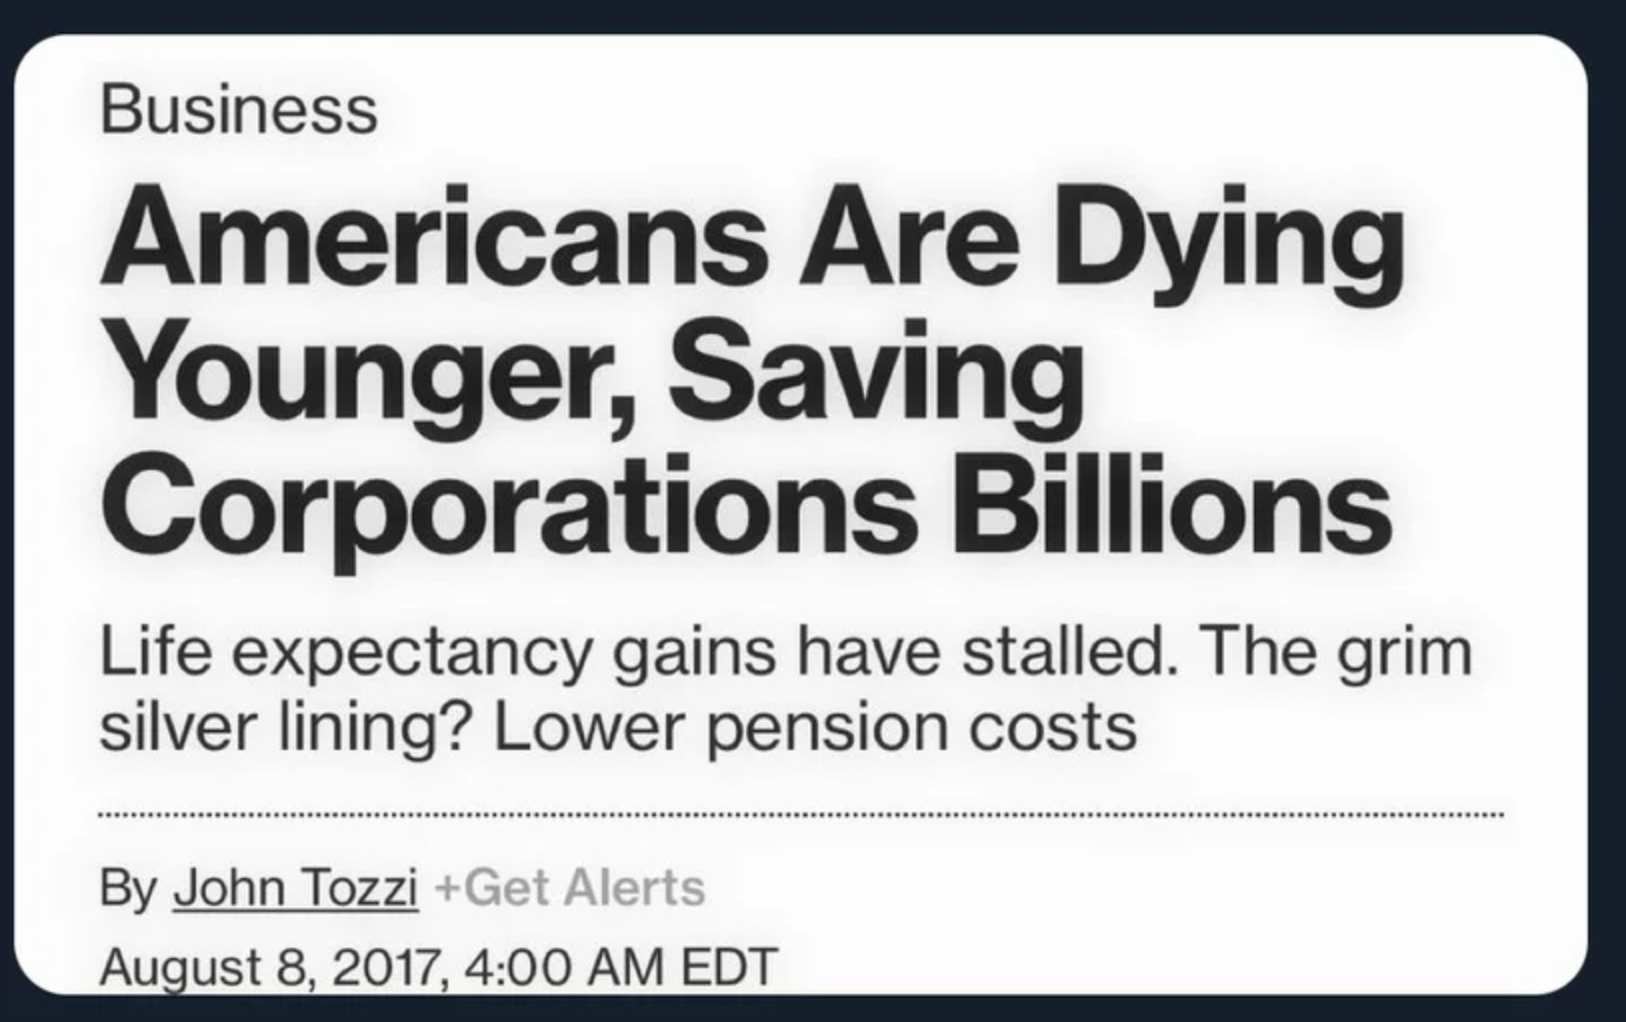 dystopian society things - american heart association - Business Americans Are Dying Younger, Saving Corporations Billions Life expectancy gains have stalled. The grim silver lining? Lower pension costs By John Tozzi Get Alerts , Edt